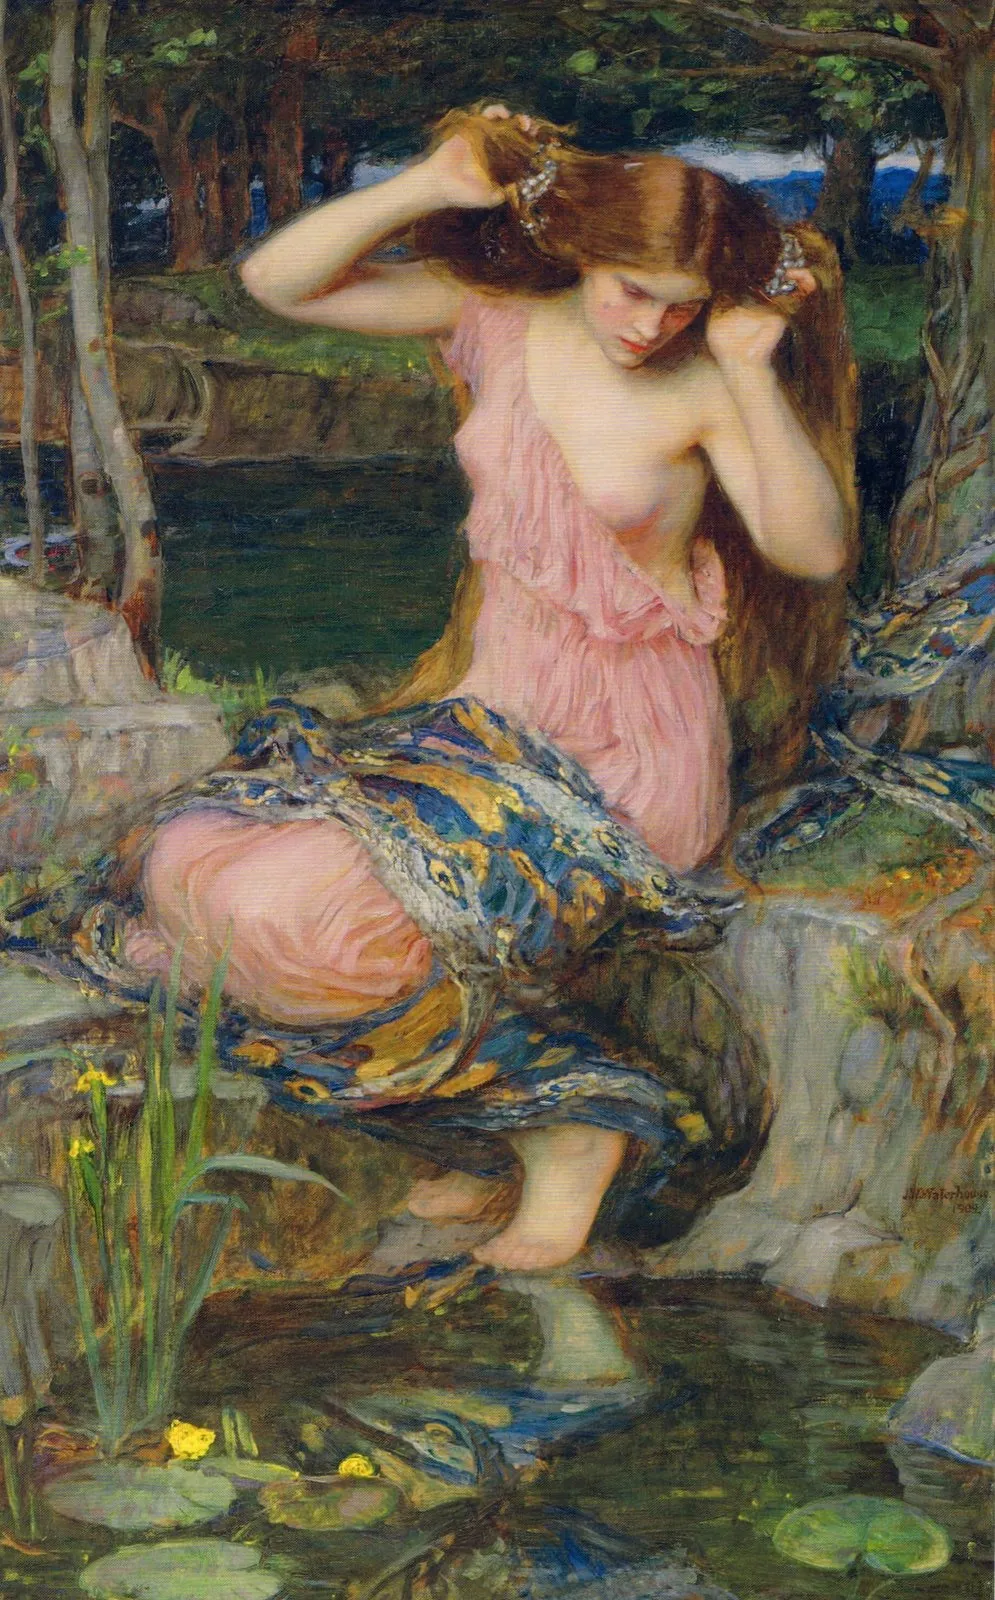 A 1909 painting of Lamia by artist John William Waterhouse